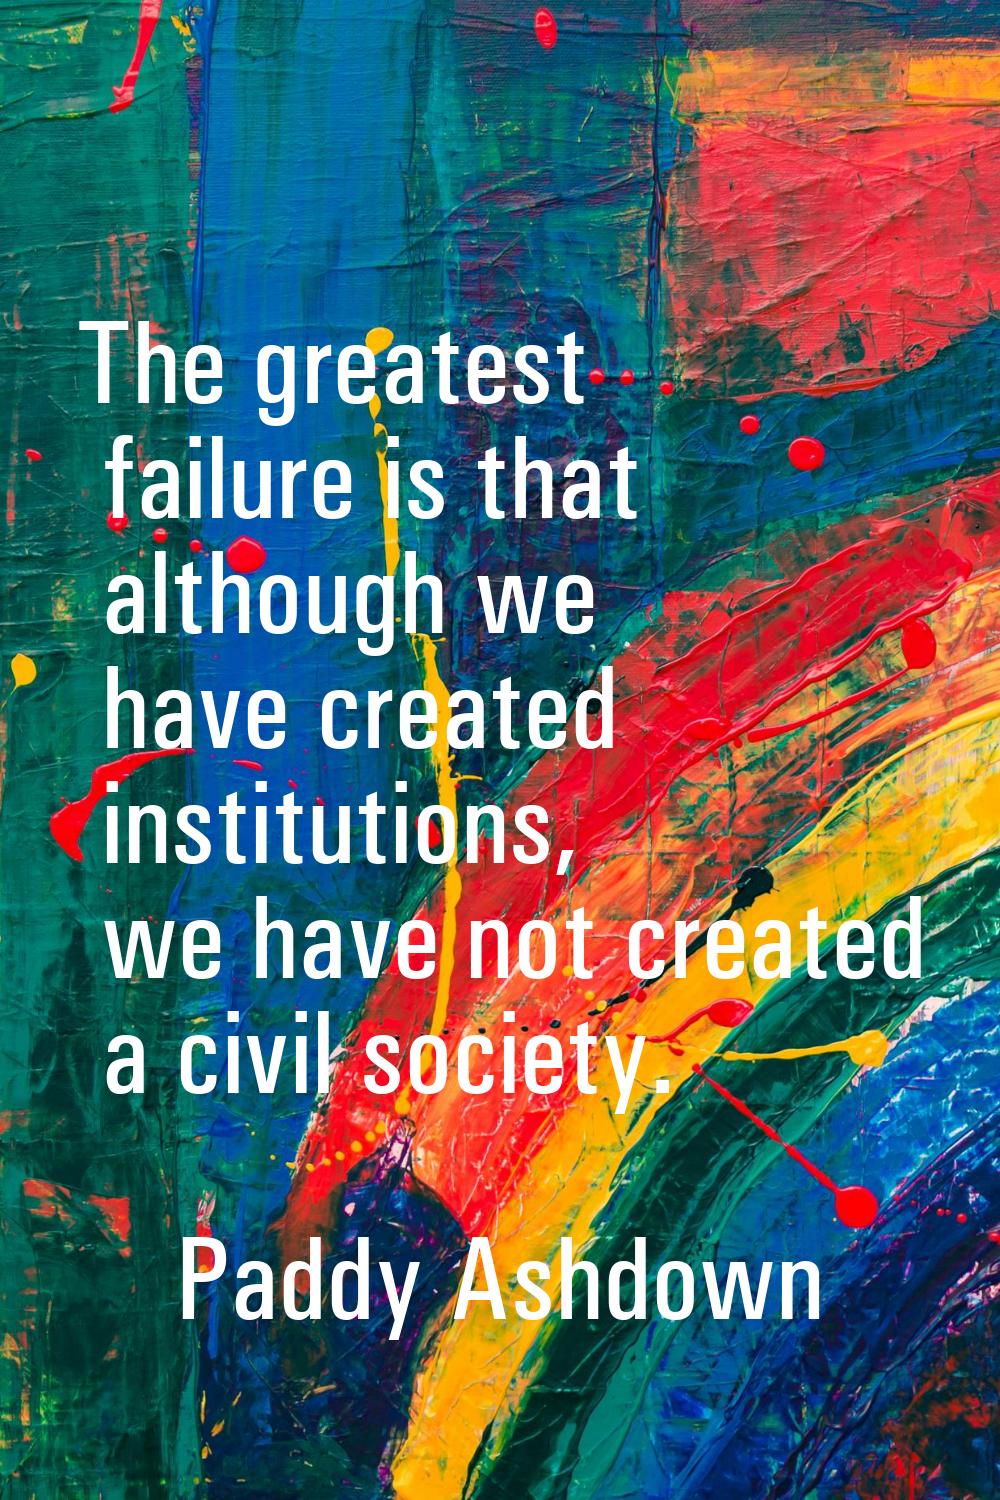 The greatest failure is that although we have created institutions, we have not created a civil soc